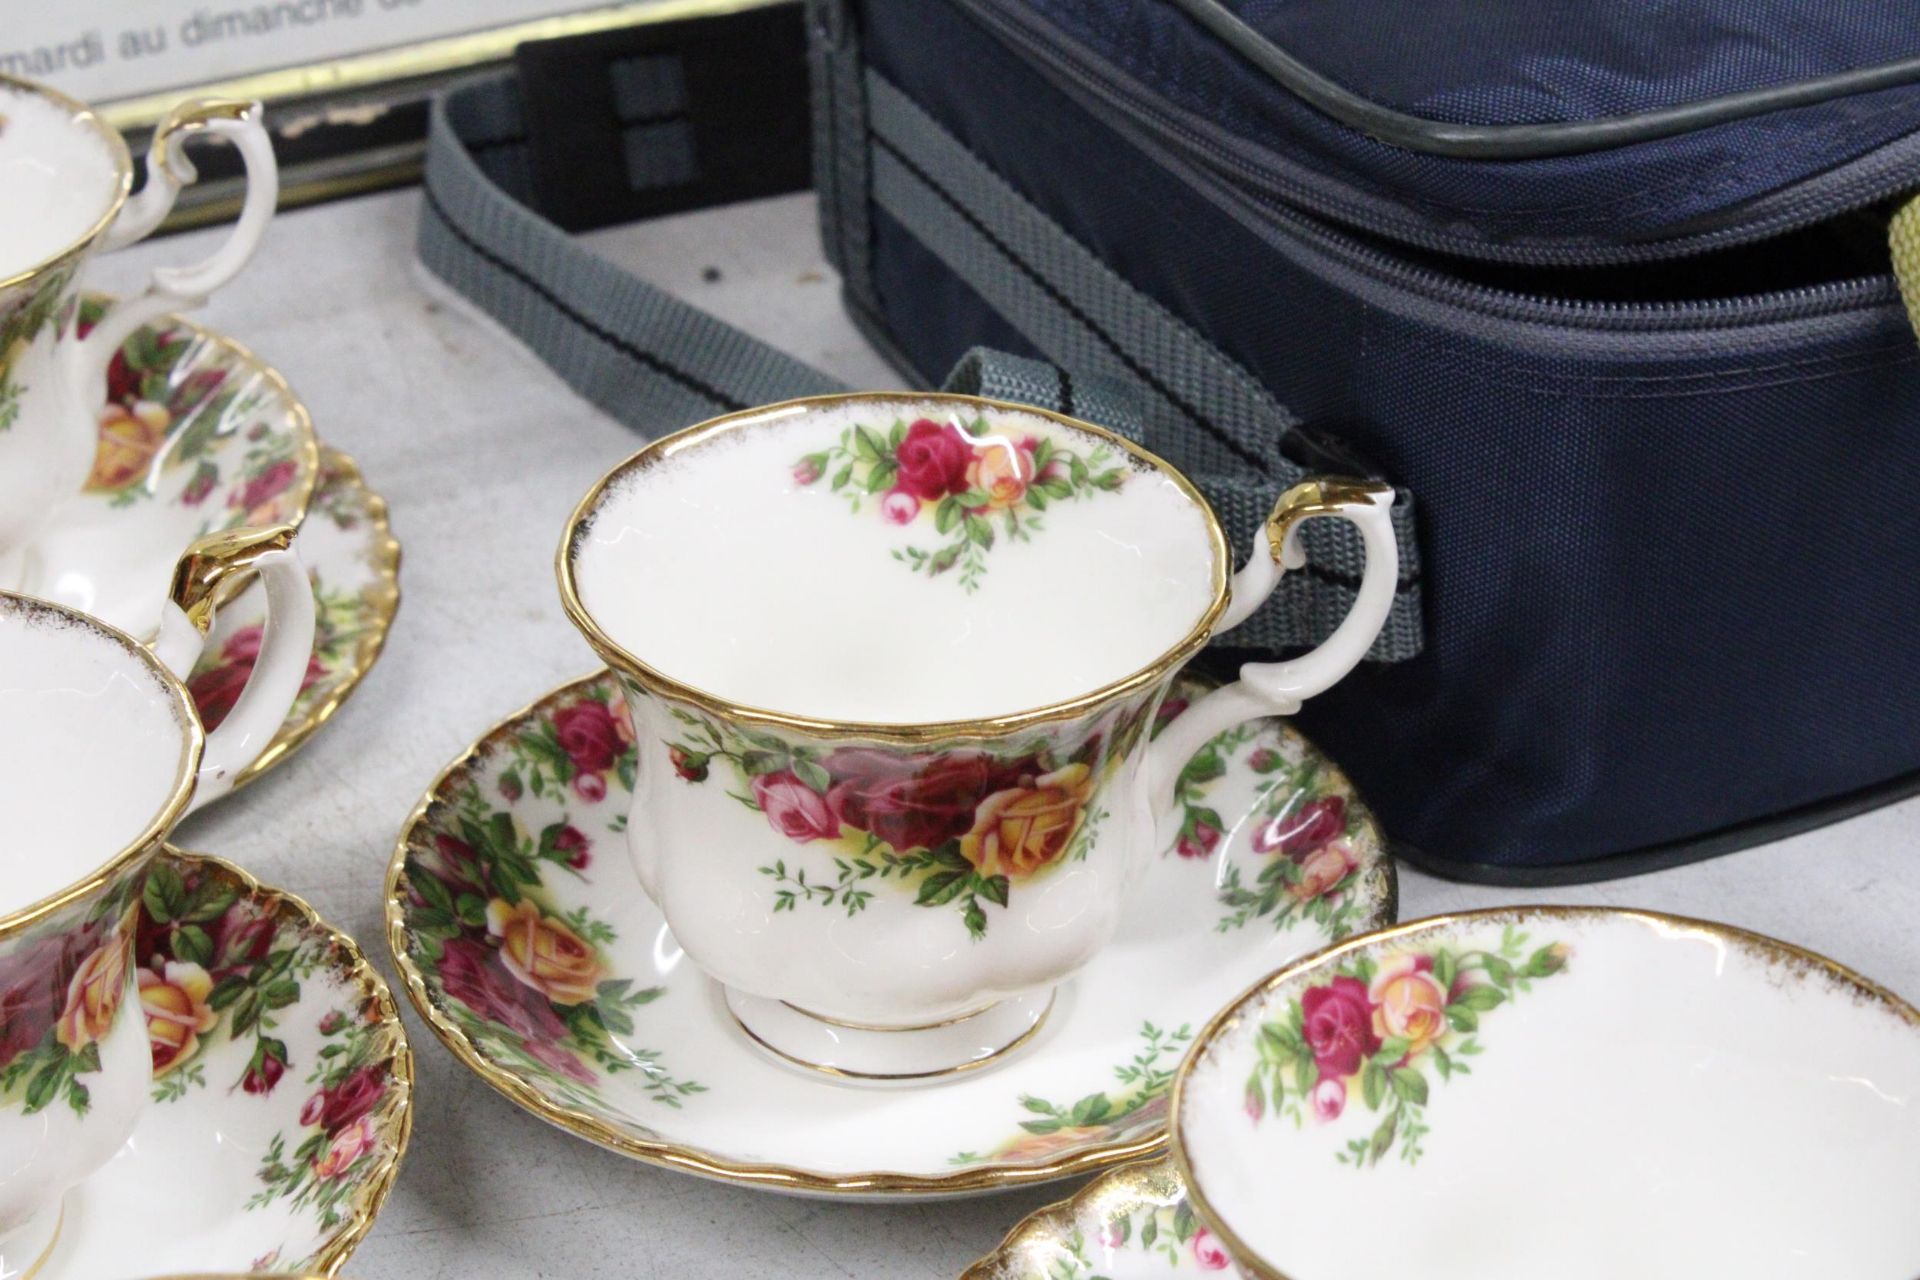 A QUANTITY OF ROYAL ALBERT 'OLD COUNTRY ROSES' TO INCLUDE CUPS, SAUCERS, A CREAM JUG AND SUGAR BOWL - Image 4 of 6